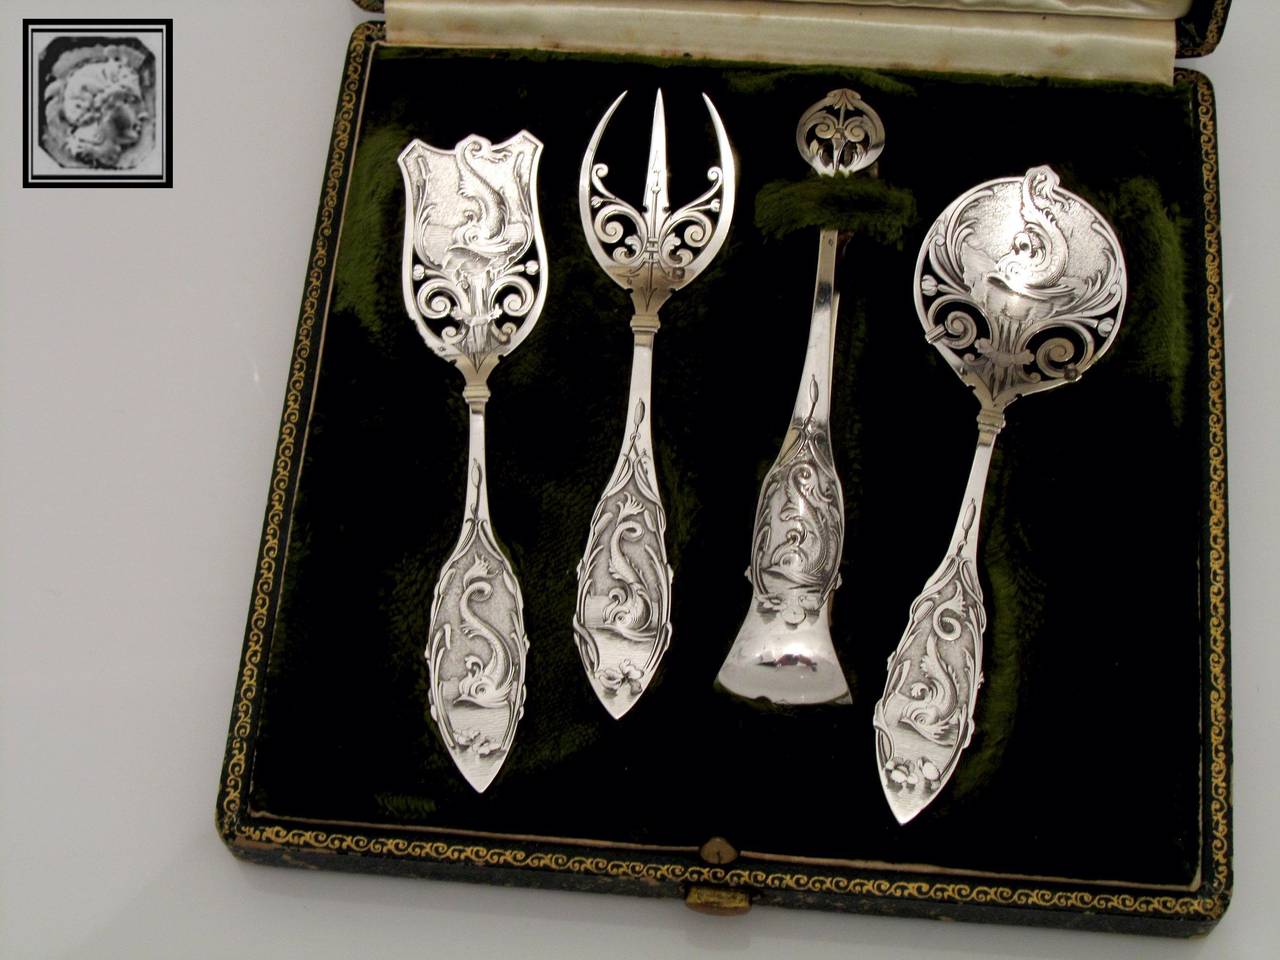 Renaissance Odiot Rare French Dolphin All Sterling Silver Dessert Set 4 pc with Original Box